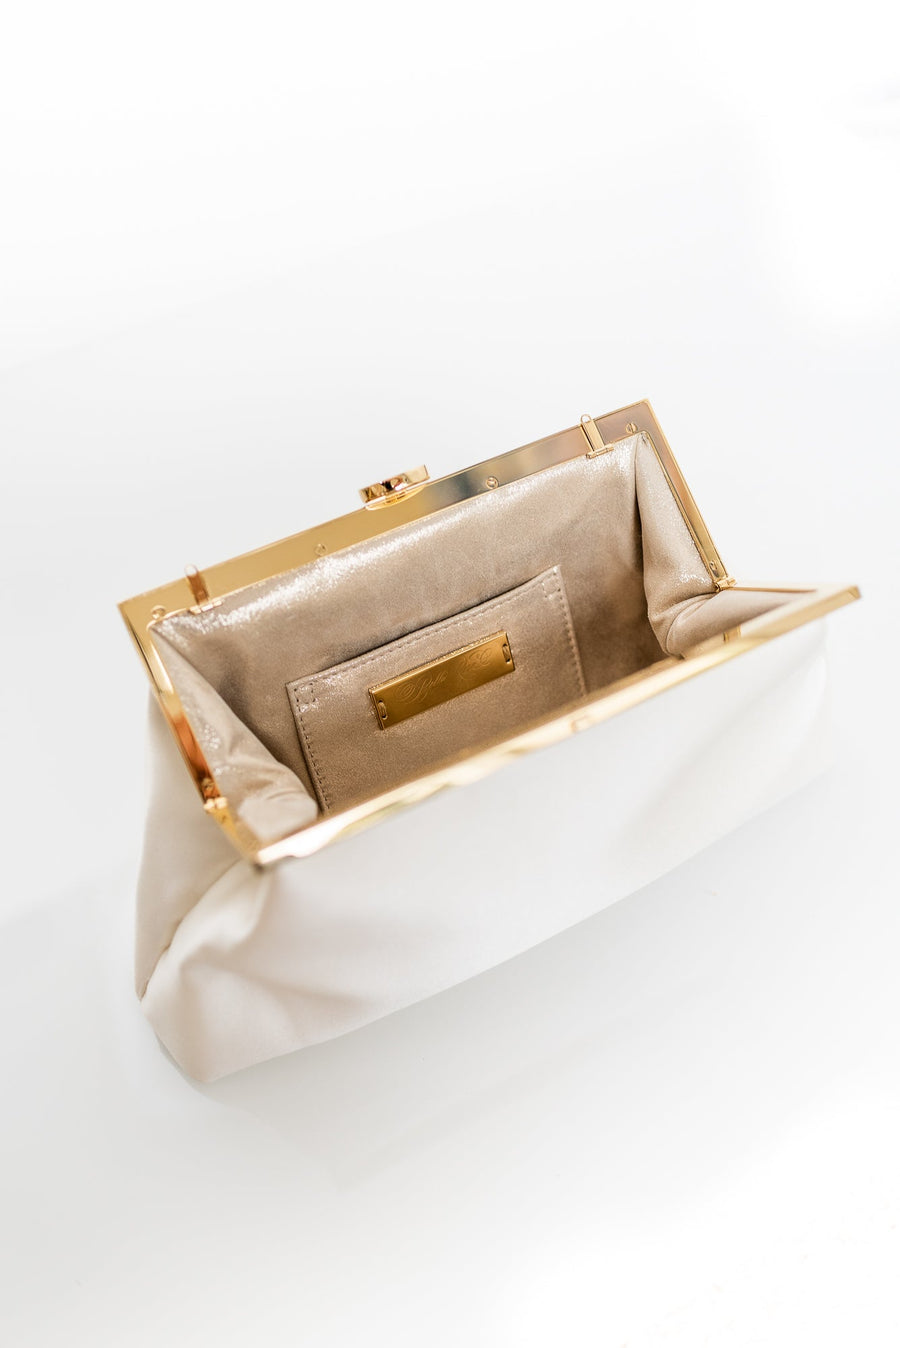 A white and gold Rosa Clutch - Ivory Floral Embroidery from The Bella Rosa Collection on a white surface.